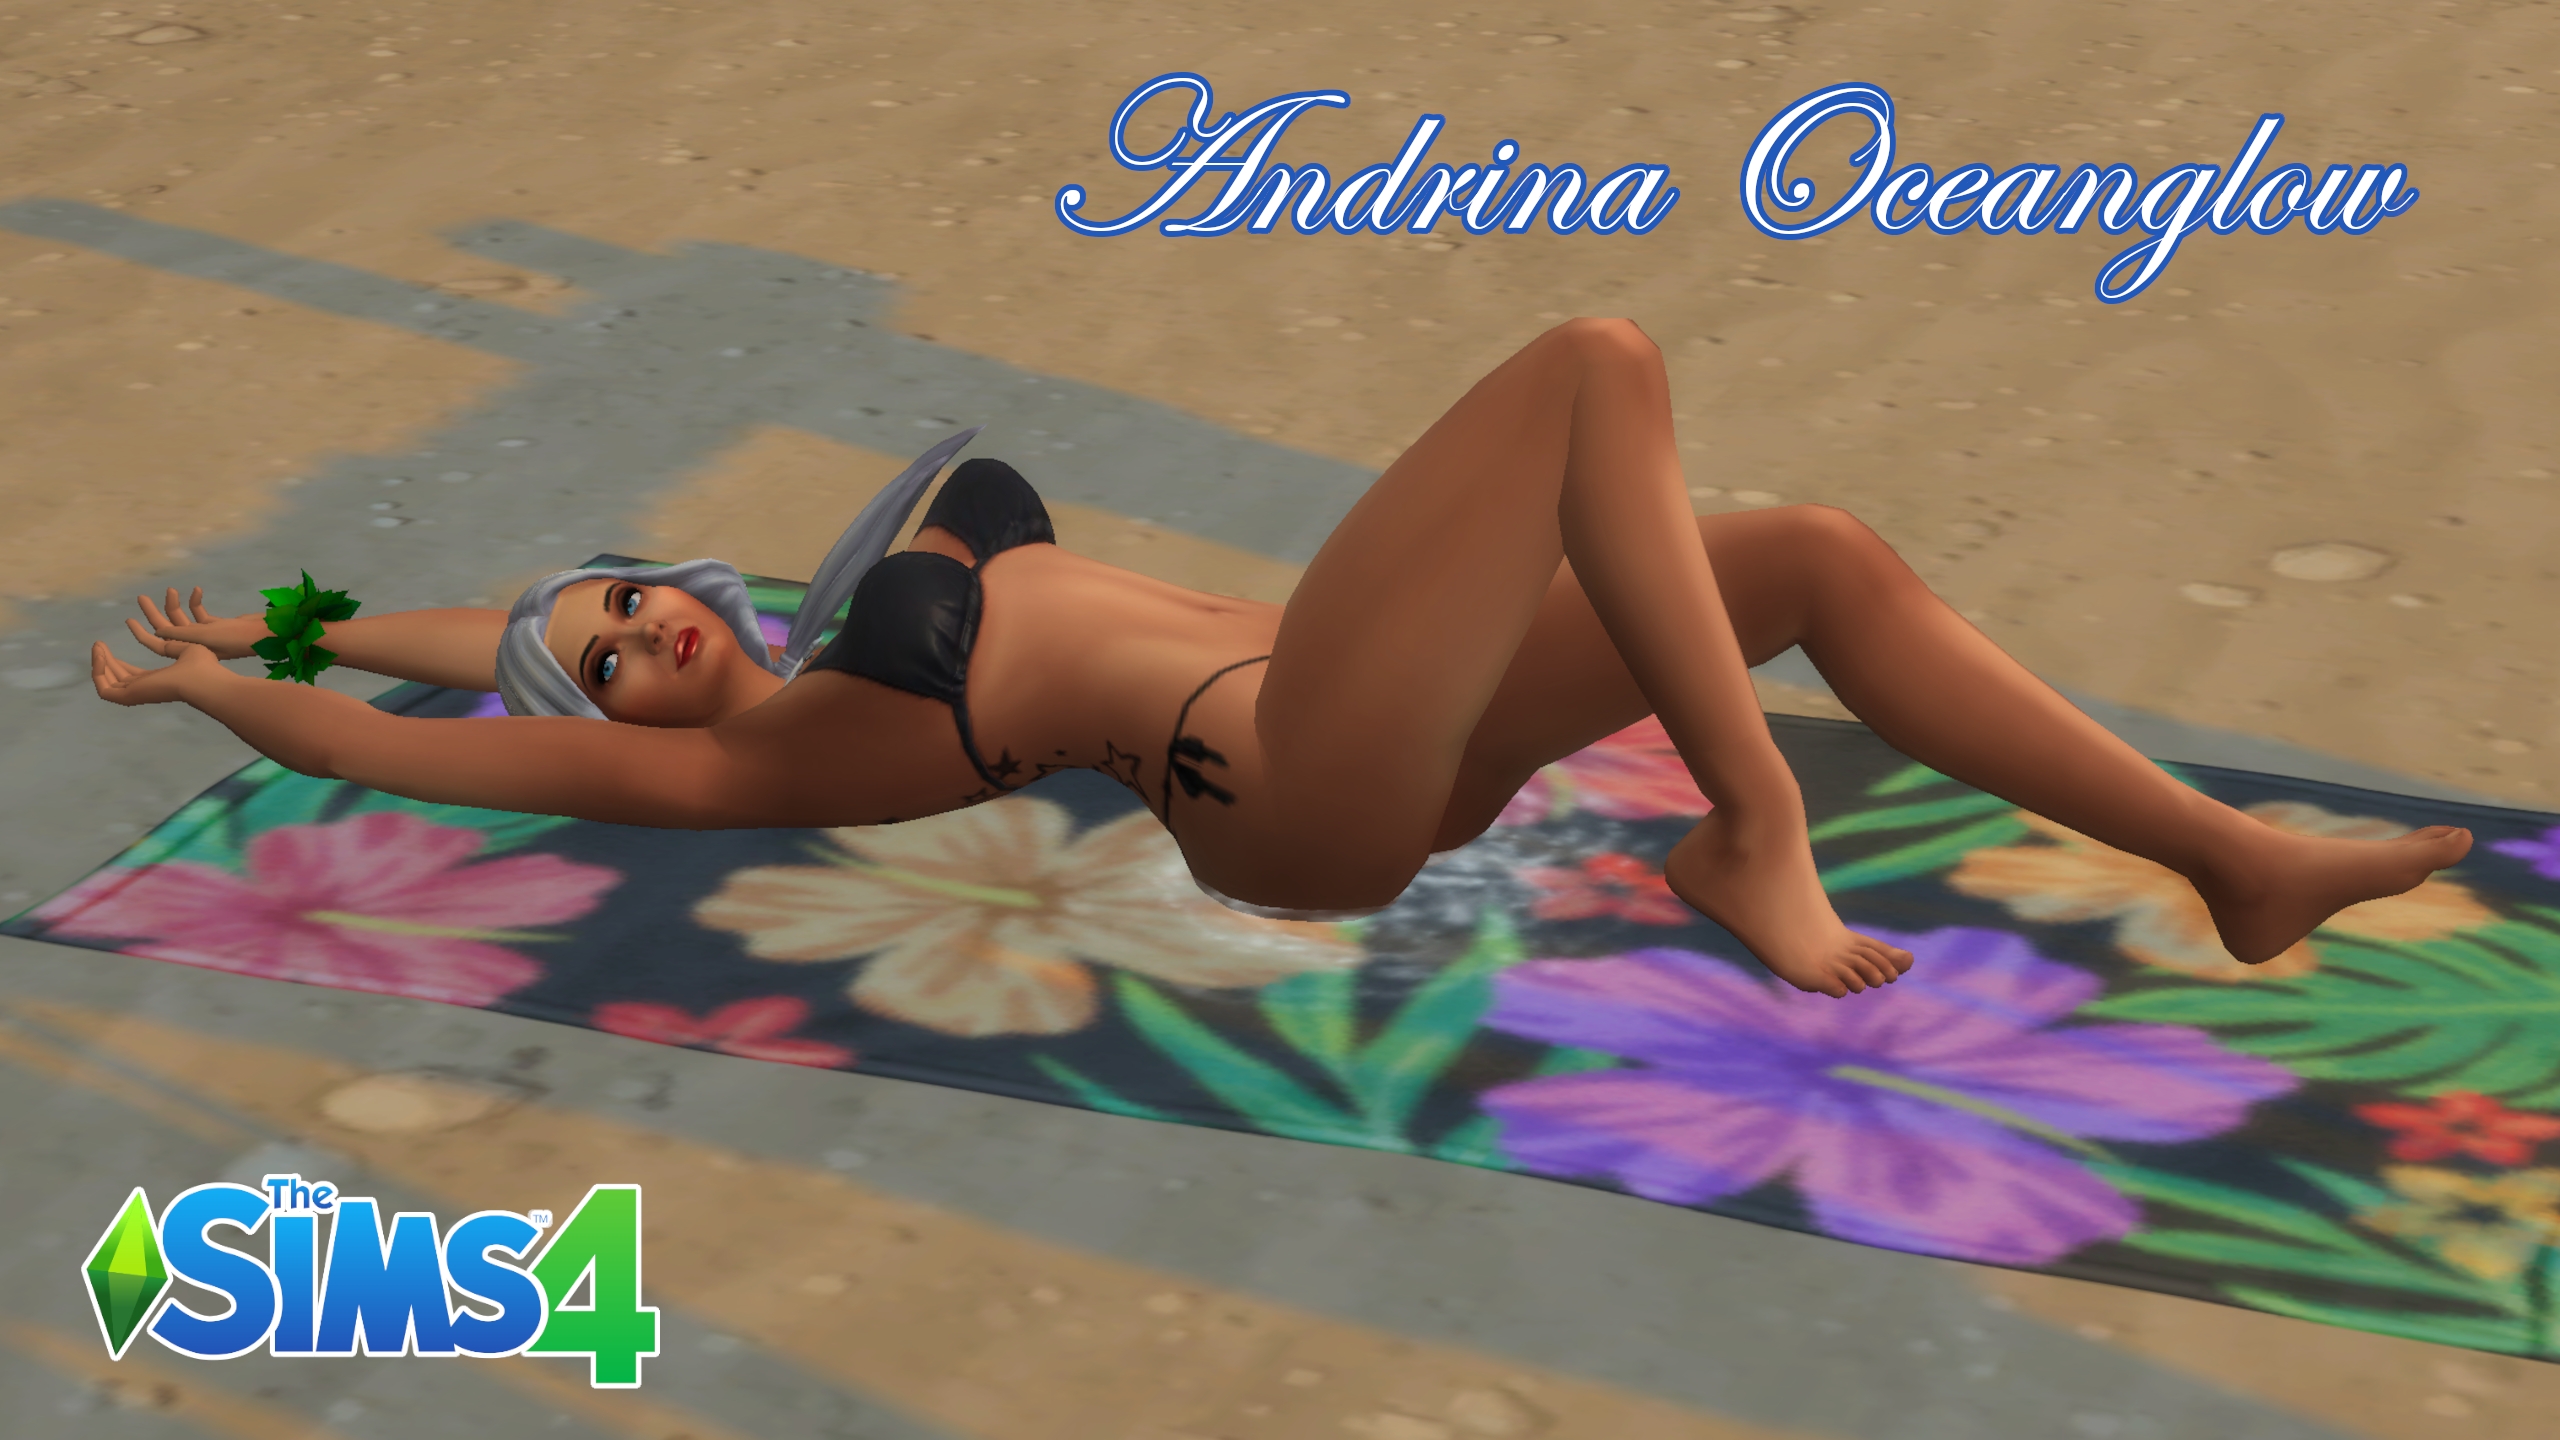 Sims 4 - Mermaid Andrina Oceanglow The Sims 4 Mermaid Siren White Hair Bustyfemale Thong Big Ass Toned Female Topless 5